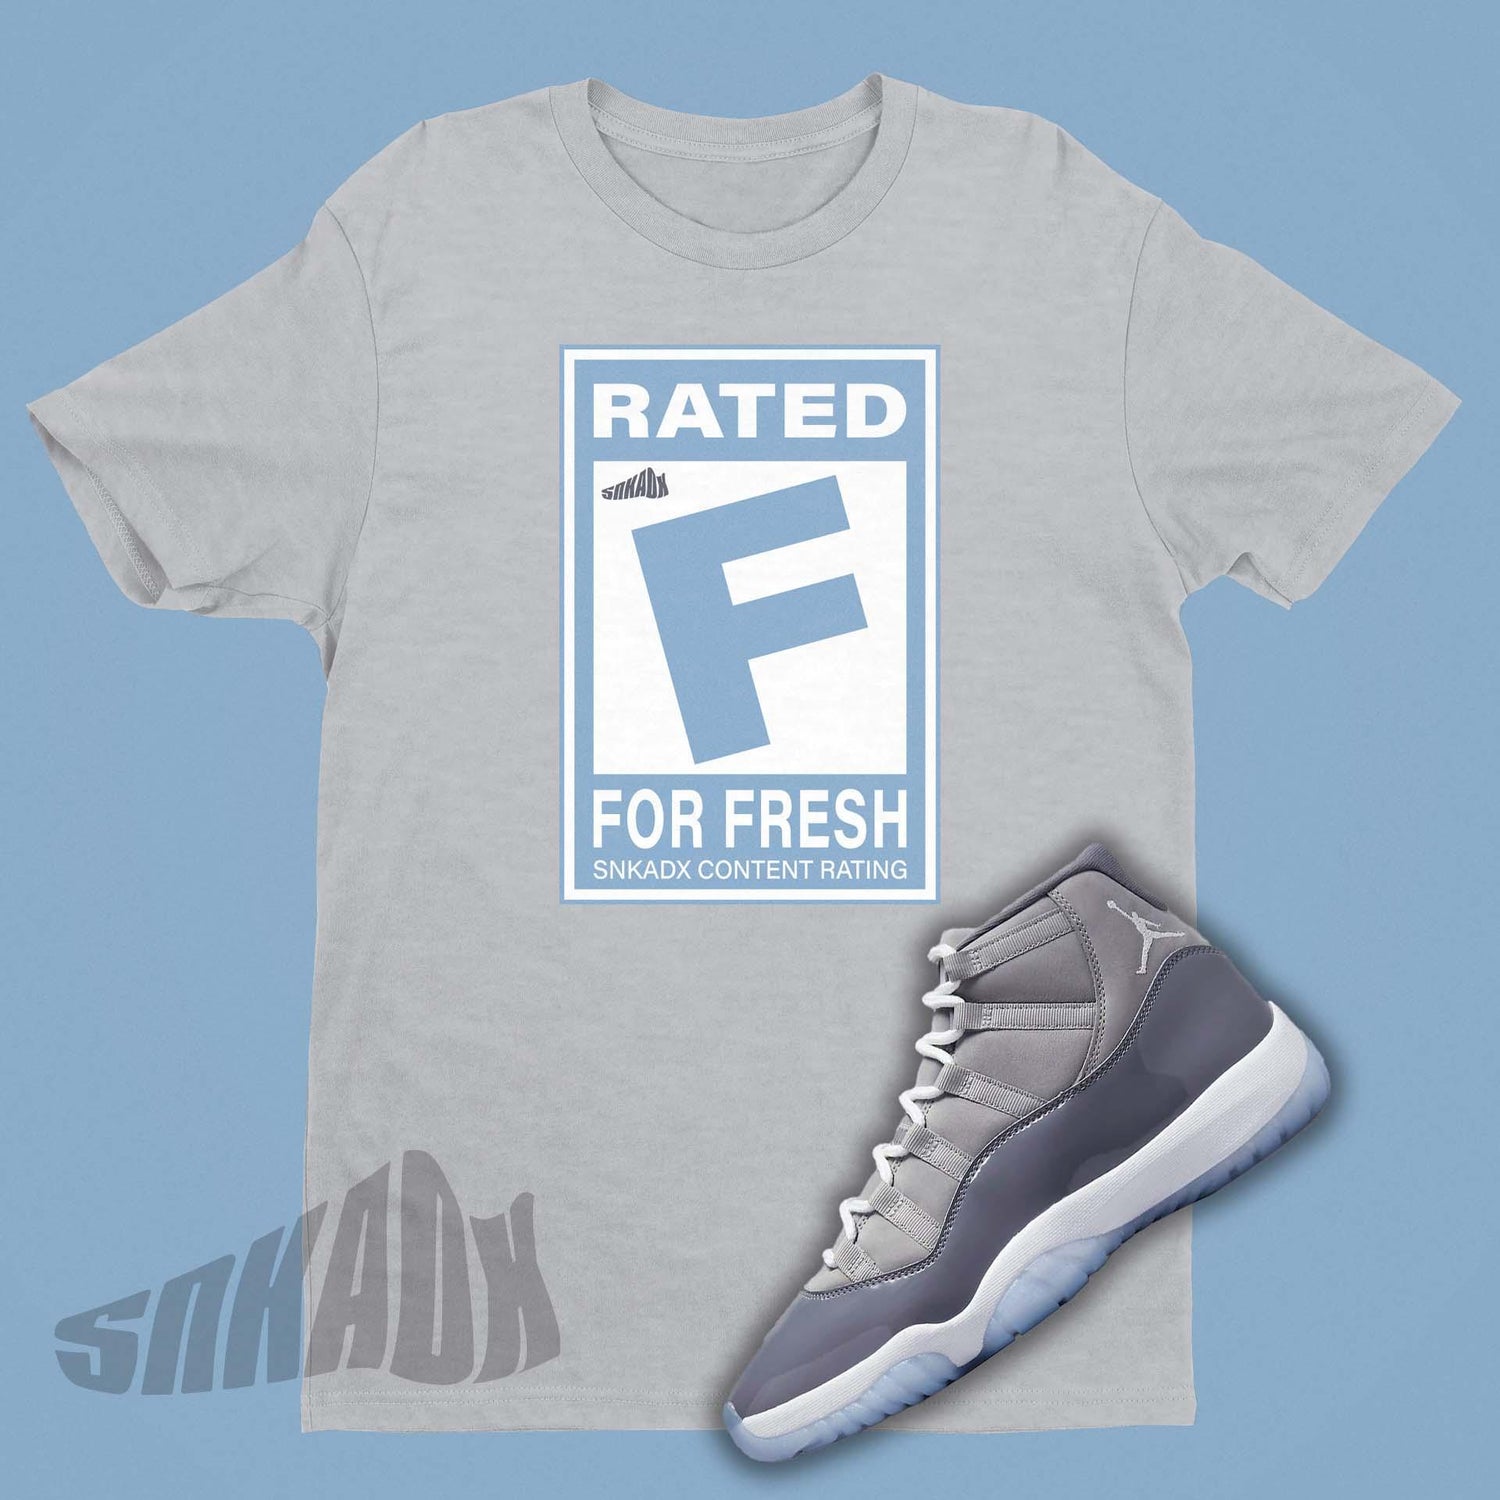 Rated F Gamer Shirt for Sneakerheads Match AJ11 Cool Grey